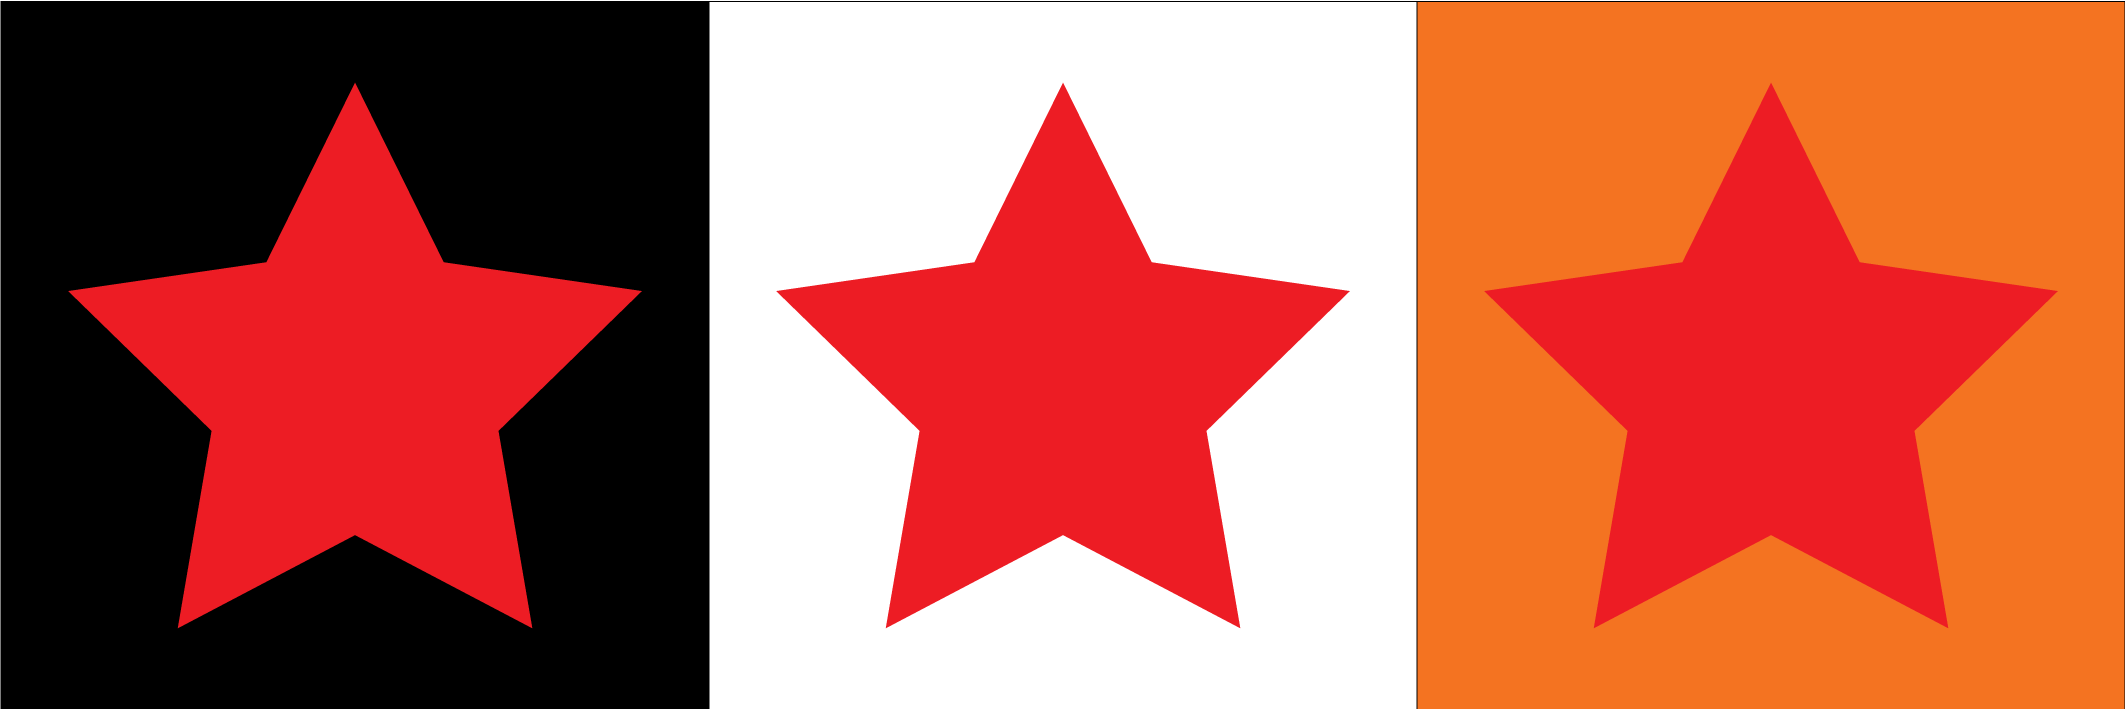 Red Orange Star Logo - The Importance of Color in Advertising and Design